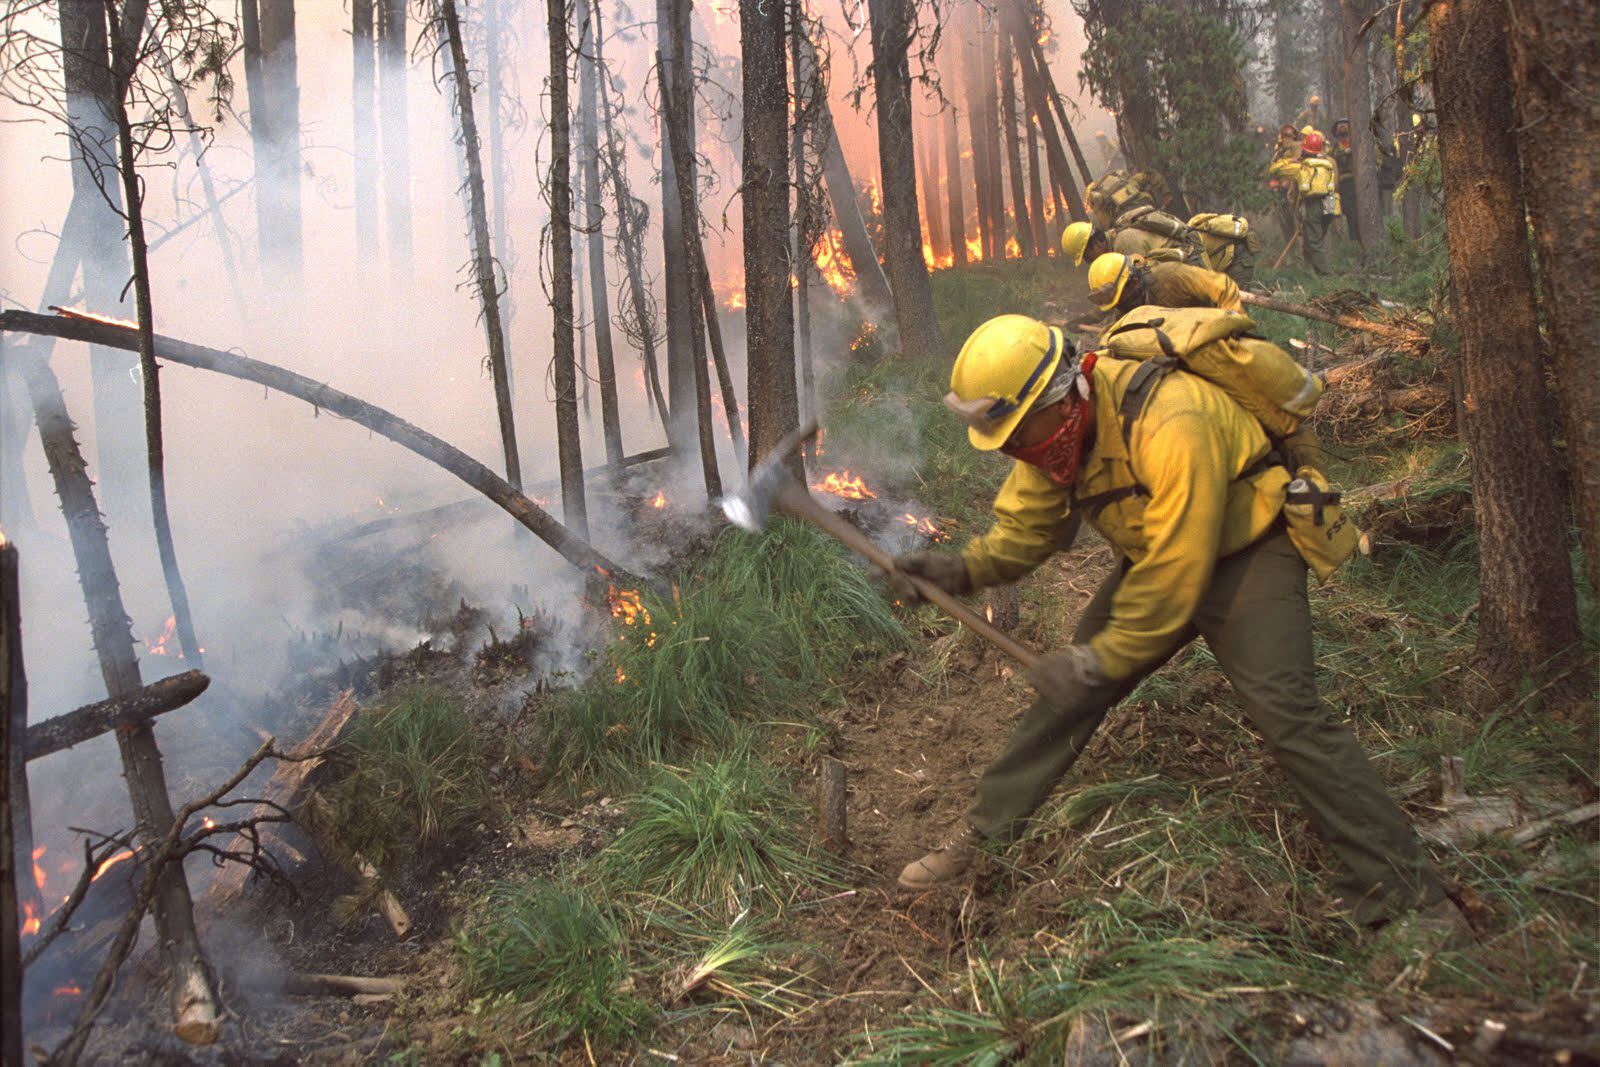 Wildland firefighters digging a fire line using hand tools while a fire burns close to them on one side.